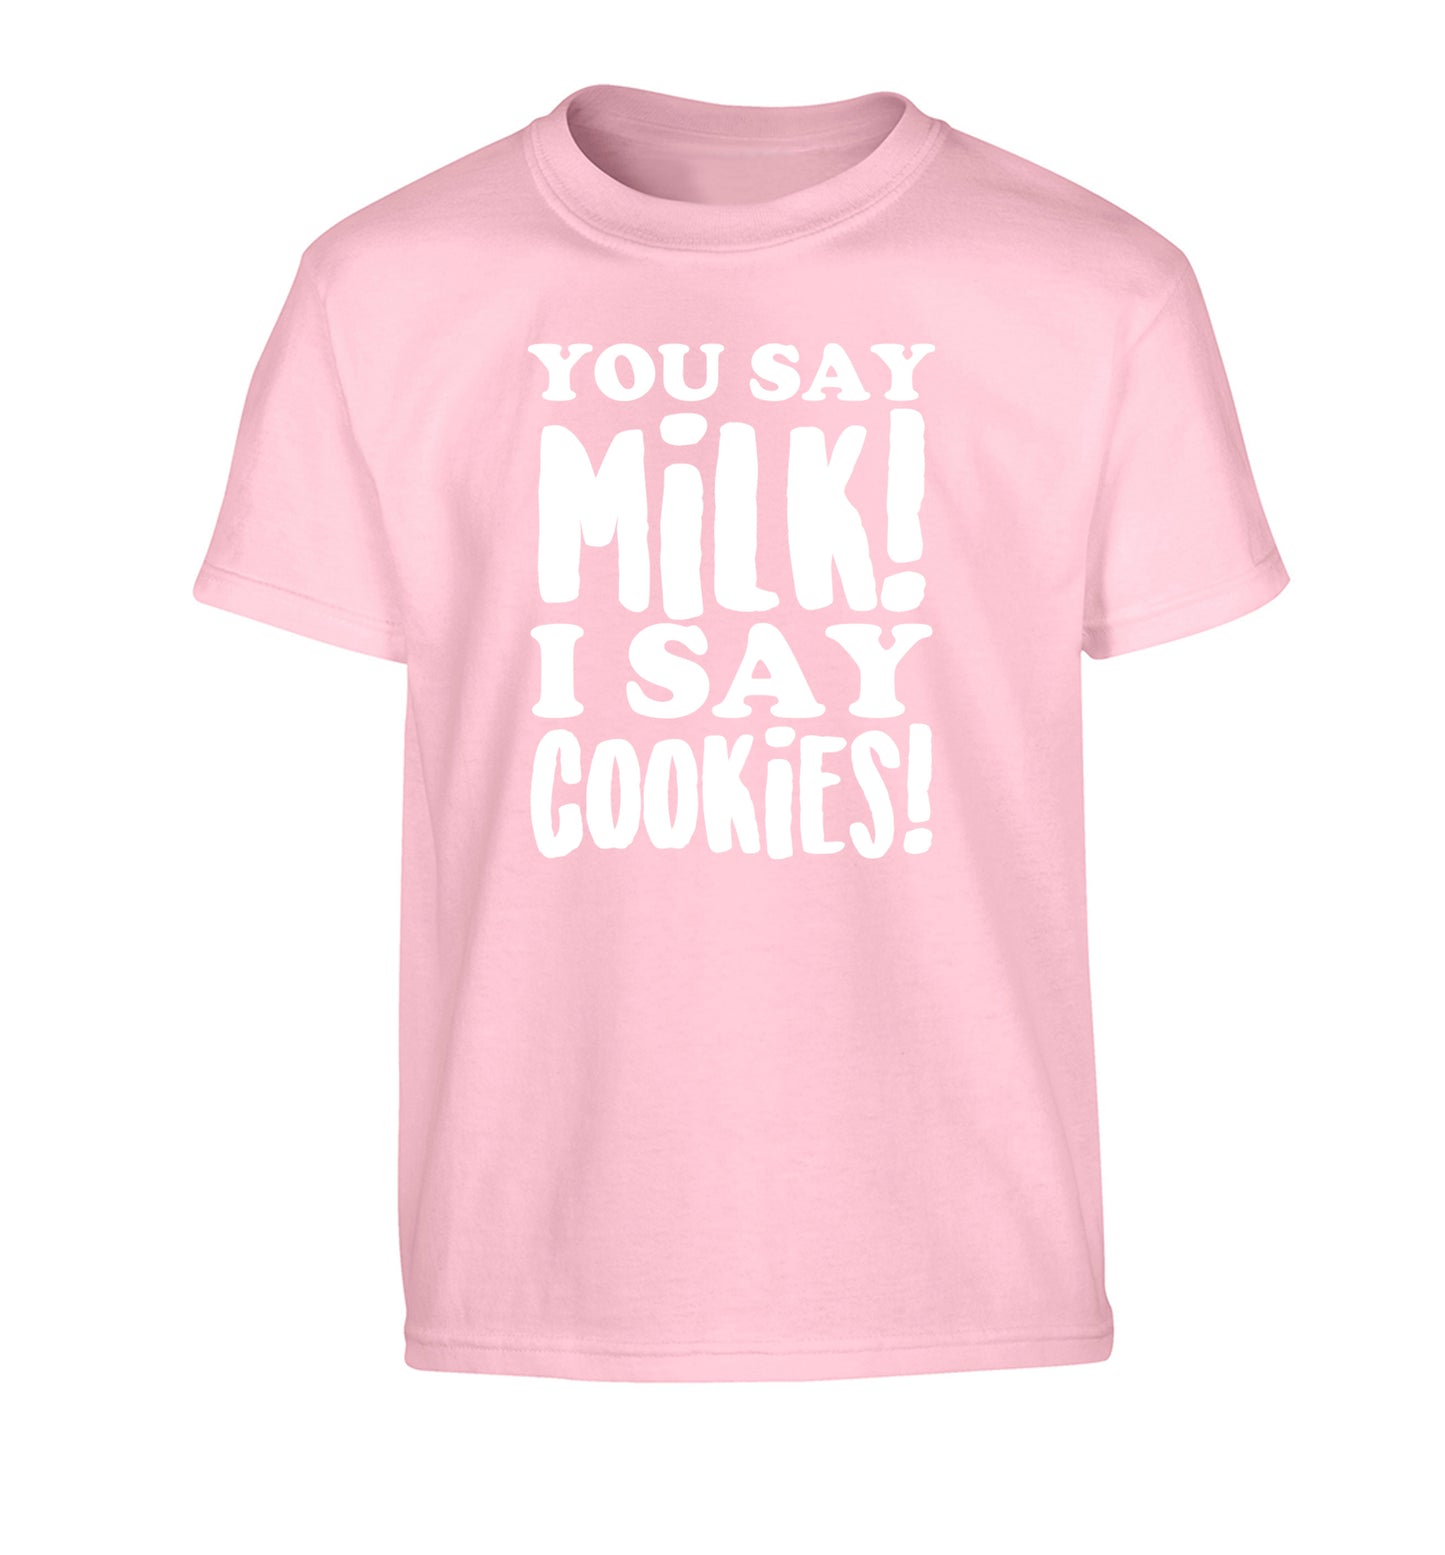 You say milk I say cookies! Children's light pink Tshirt 12-14 Years